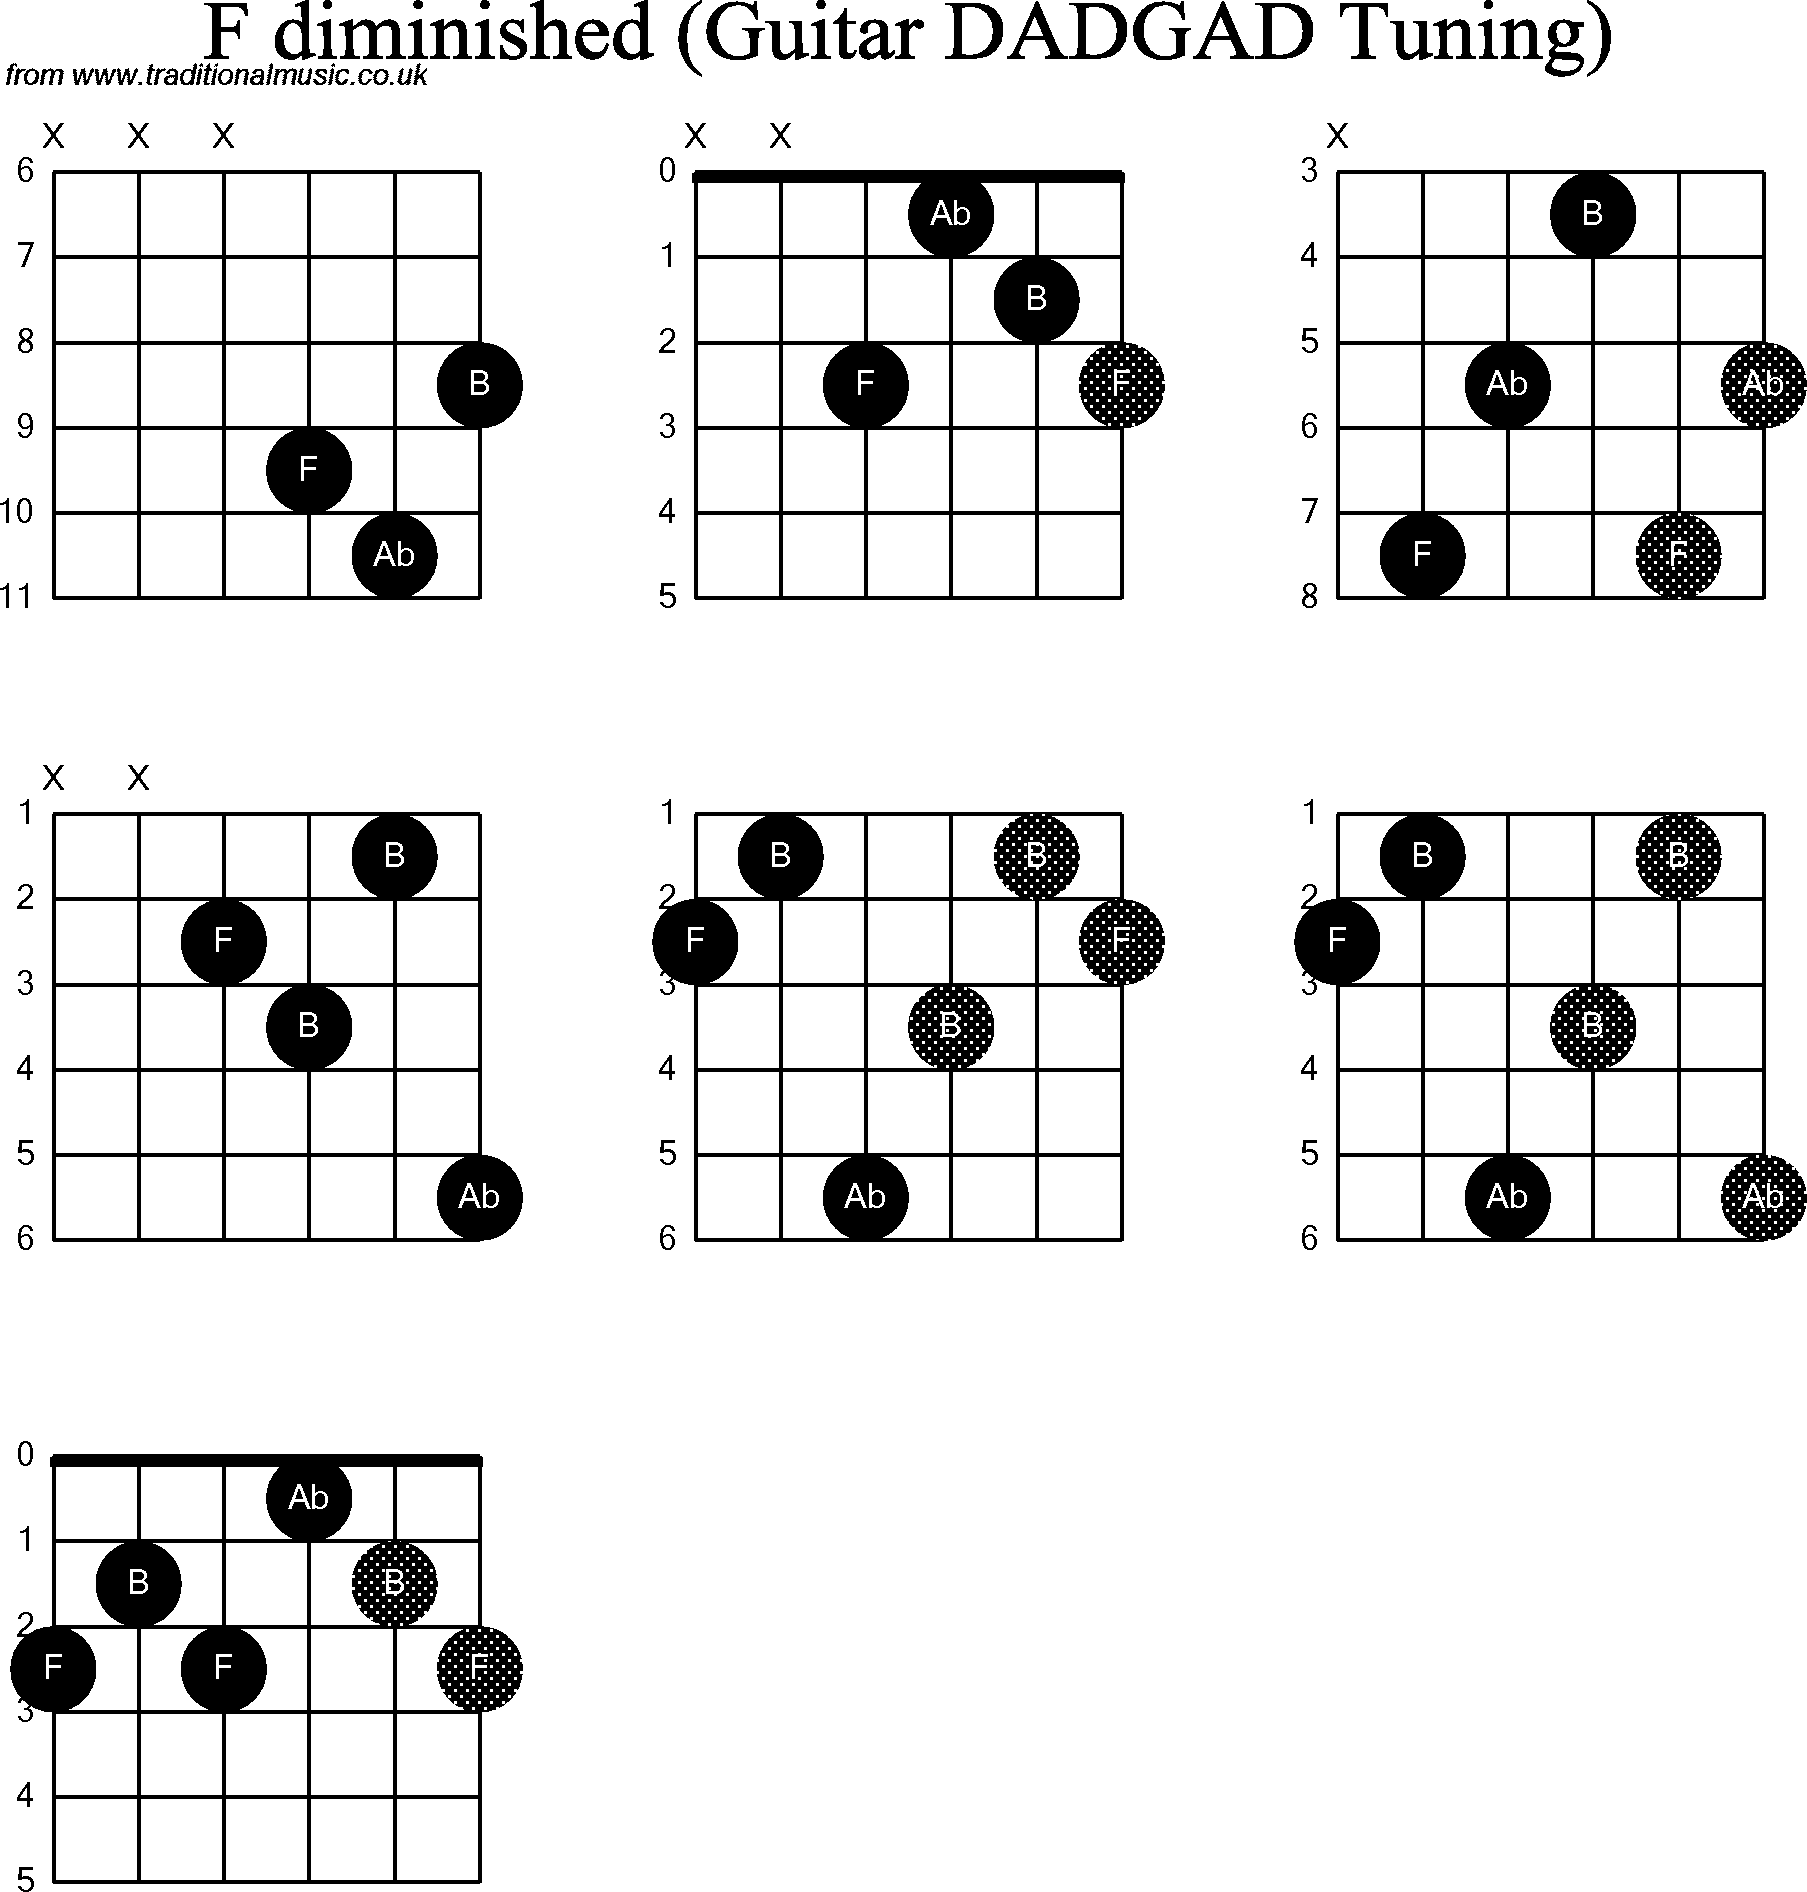 Chord Diagrams for D Modal Guitar(DADGAD), F Diminished